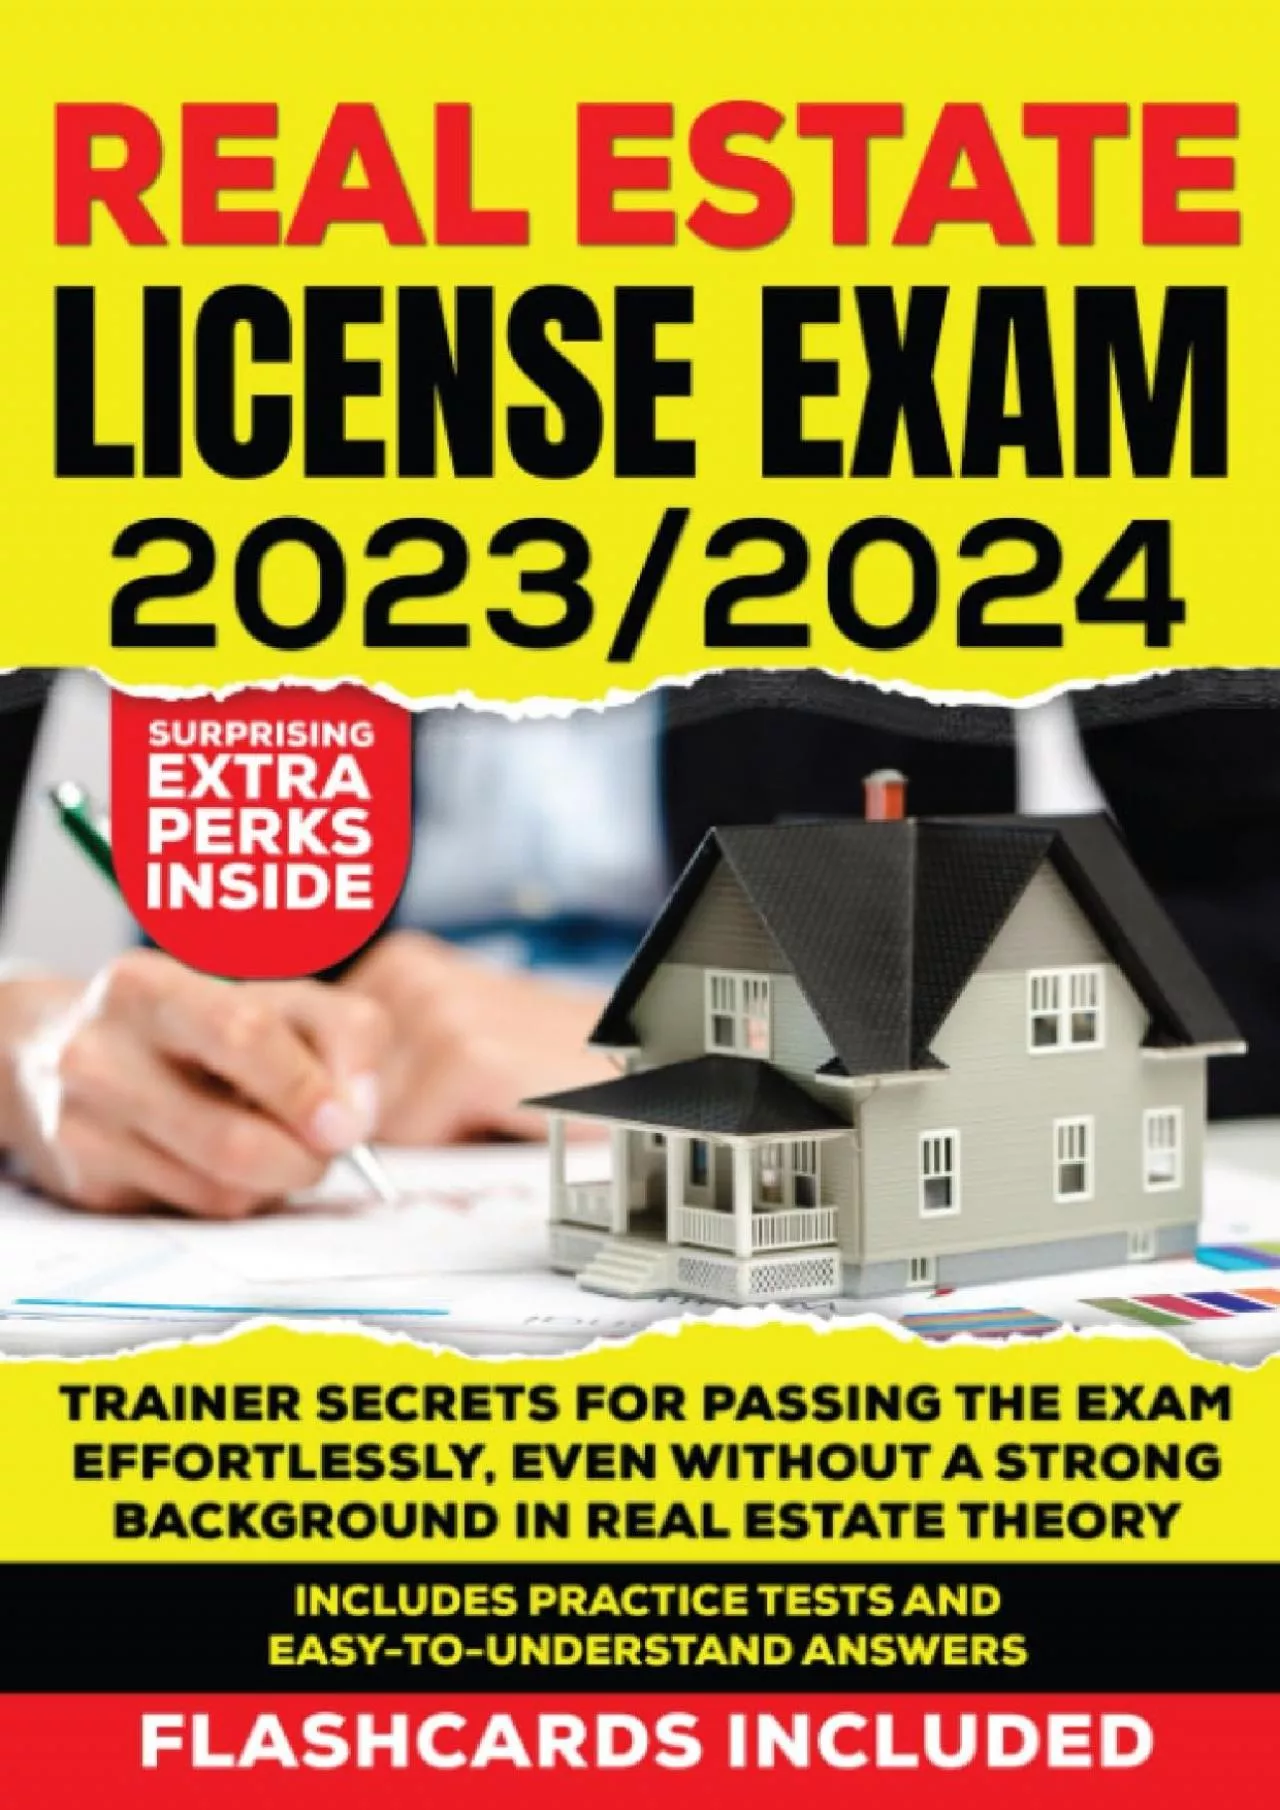 [EBOOK] Real Estate License Exams 2023/2024: Trainer Secrets for Passing the Exam Effortlessly,